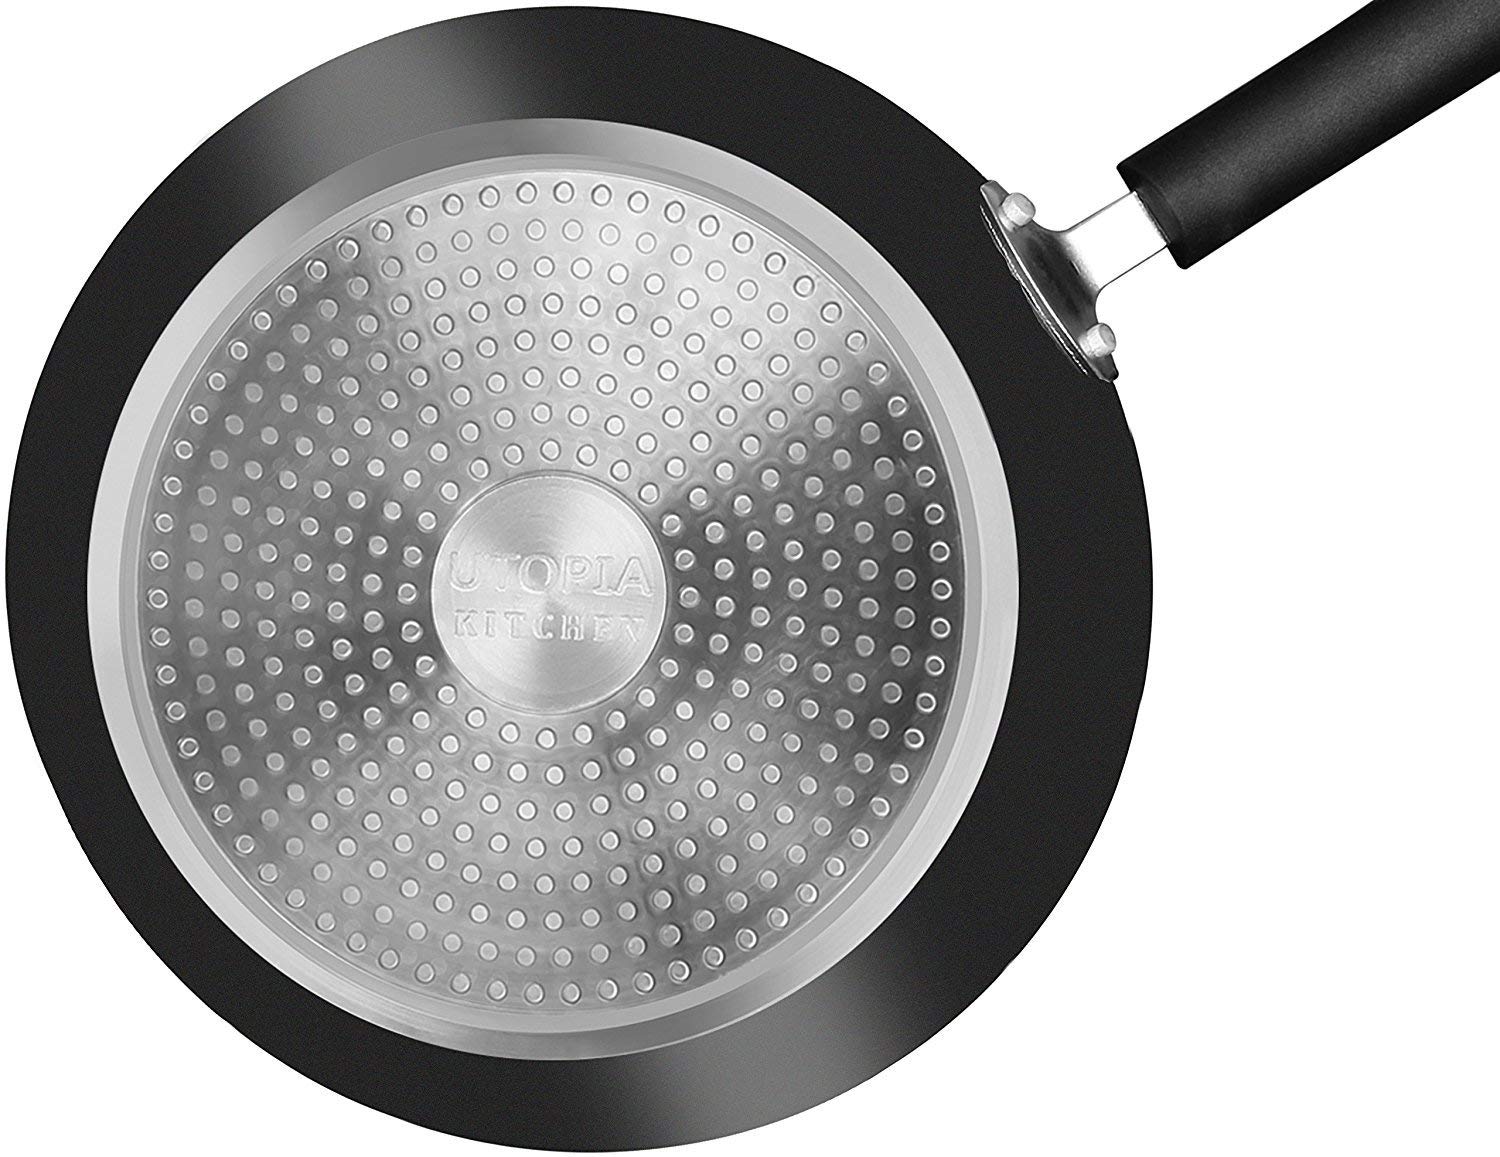 Utopia Kitchen Nonstick Frying Pan Set - 3 Piece Induction Bottom - 8  Inches, 9.5 Inches and 11 Inches (Grey-Black)